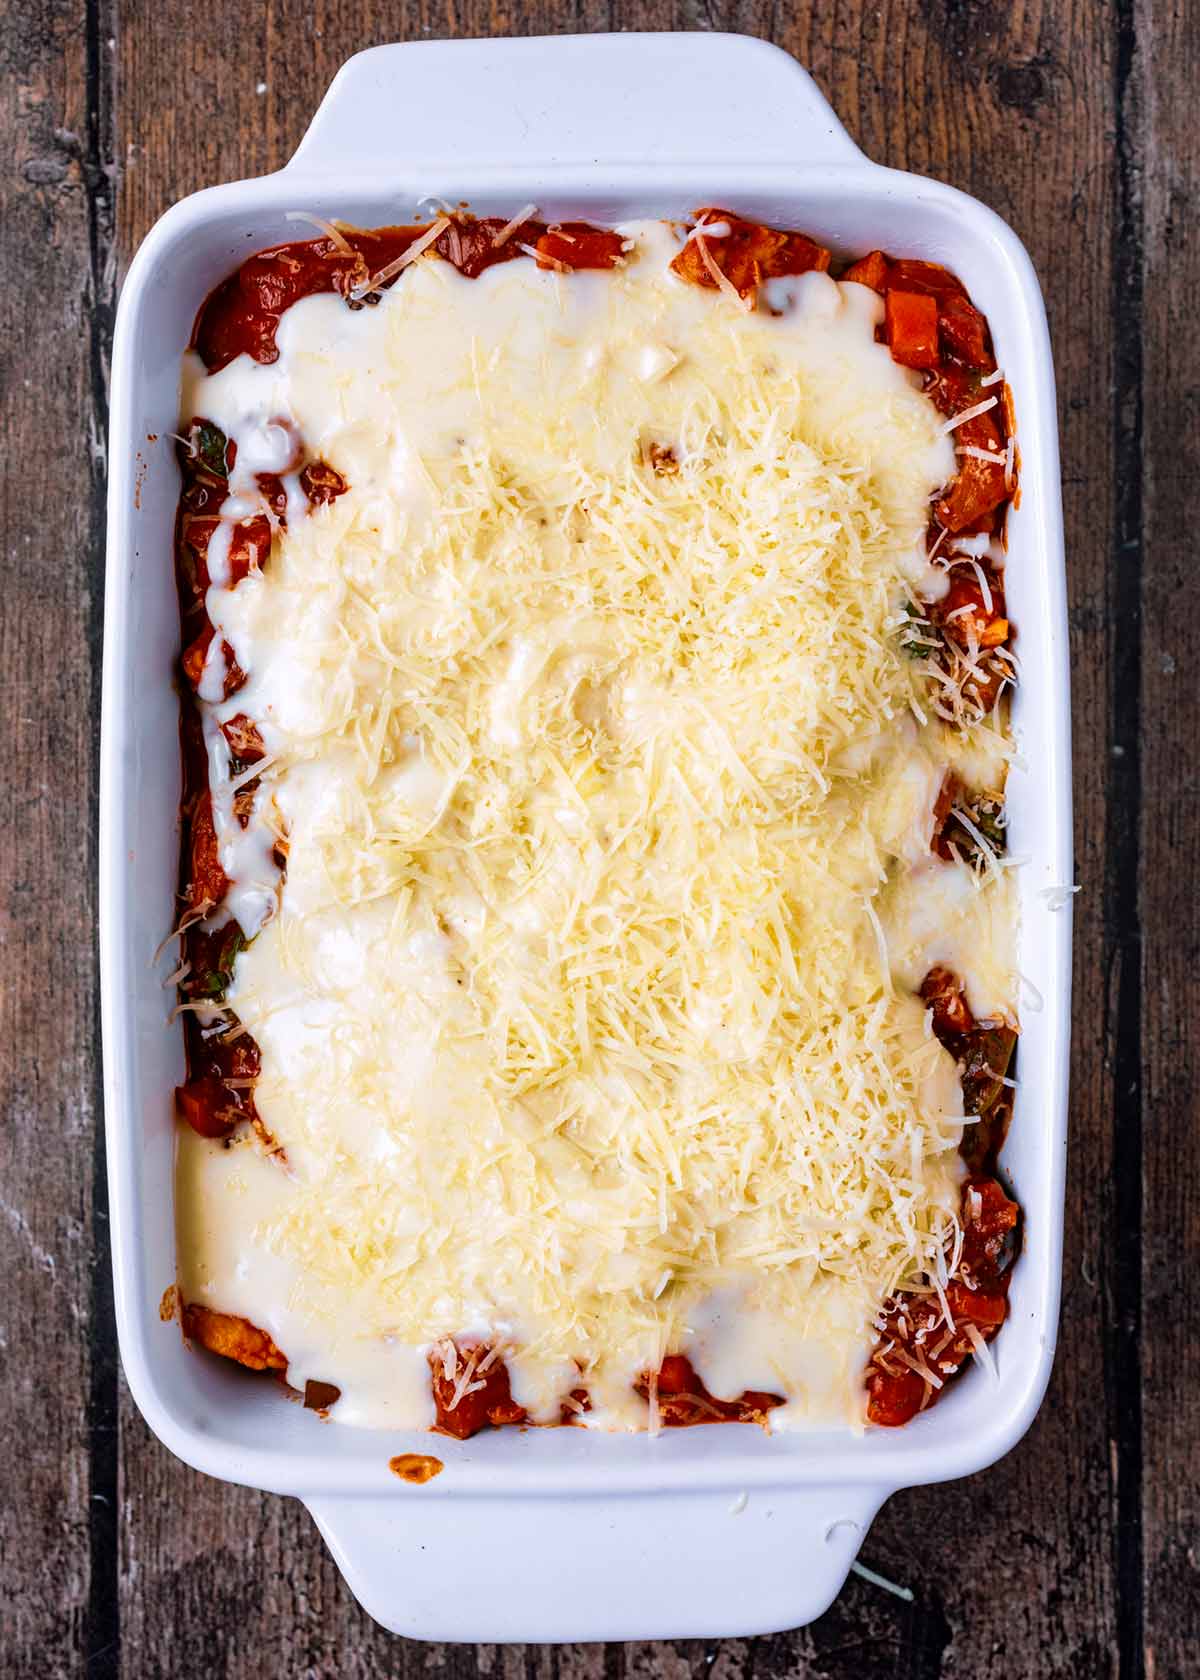 More ragu, bechamel and grated cheese added to the dish.